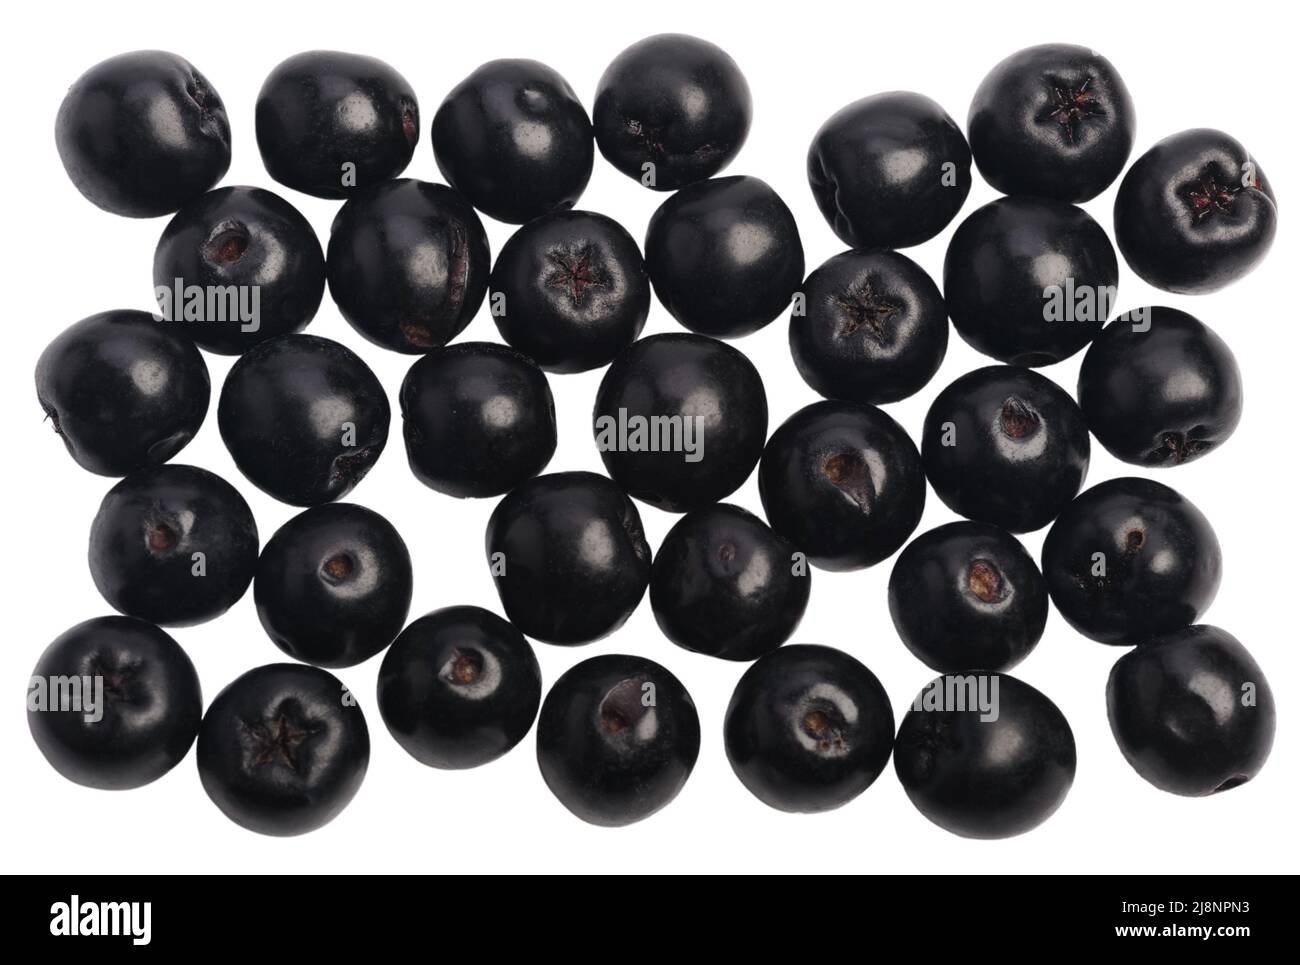 Several black officinal Сhokeberry berries isolated on a white background Stock Photo